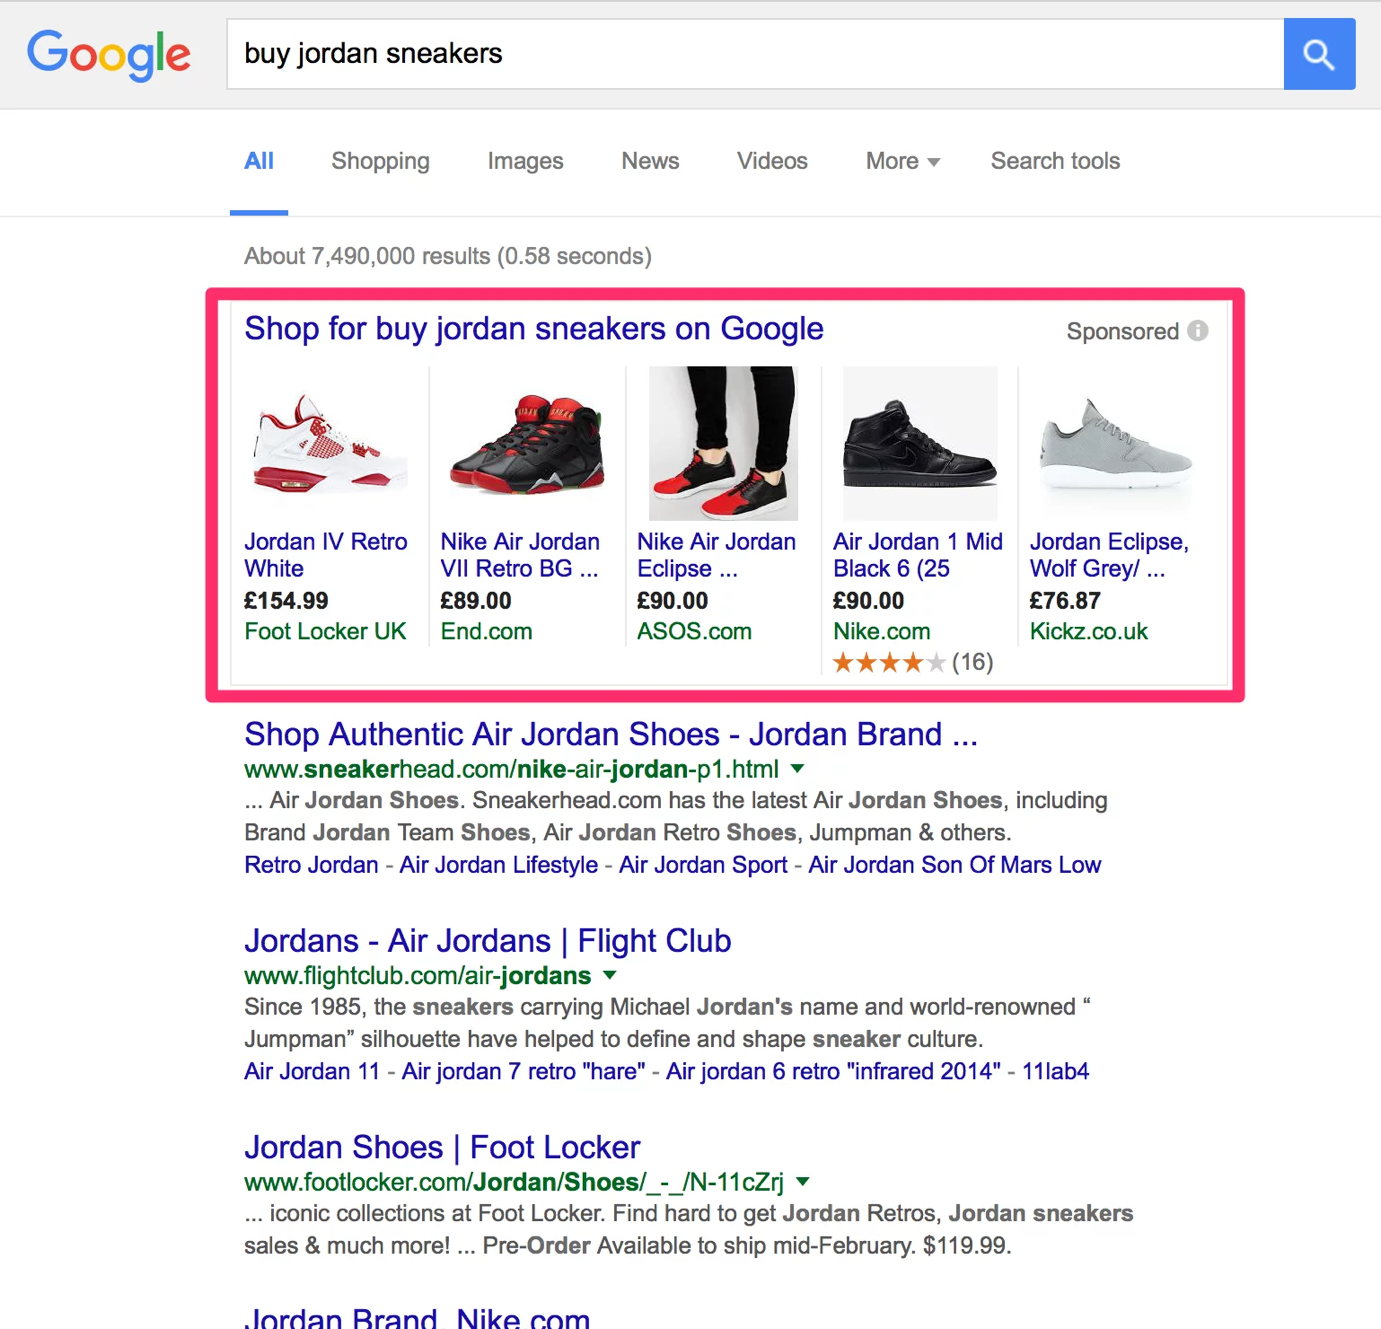 How to Advertise Your Shopify Store on Google the Smart Way